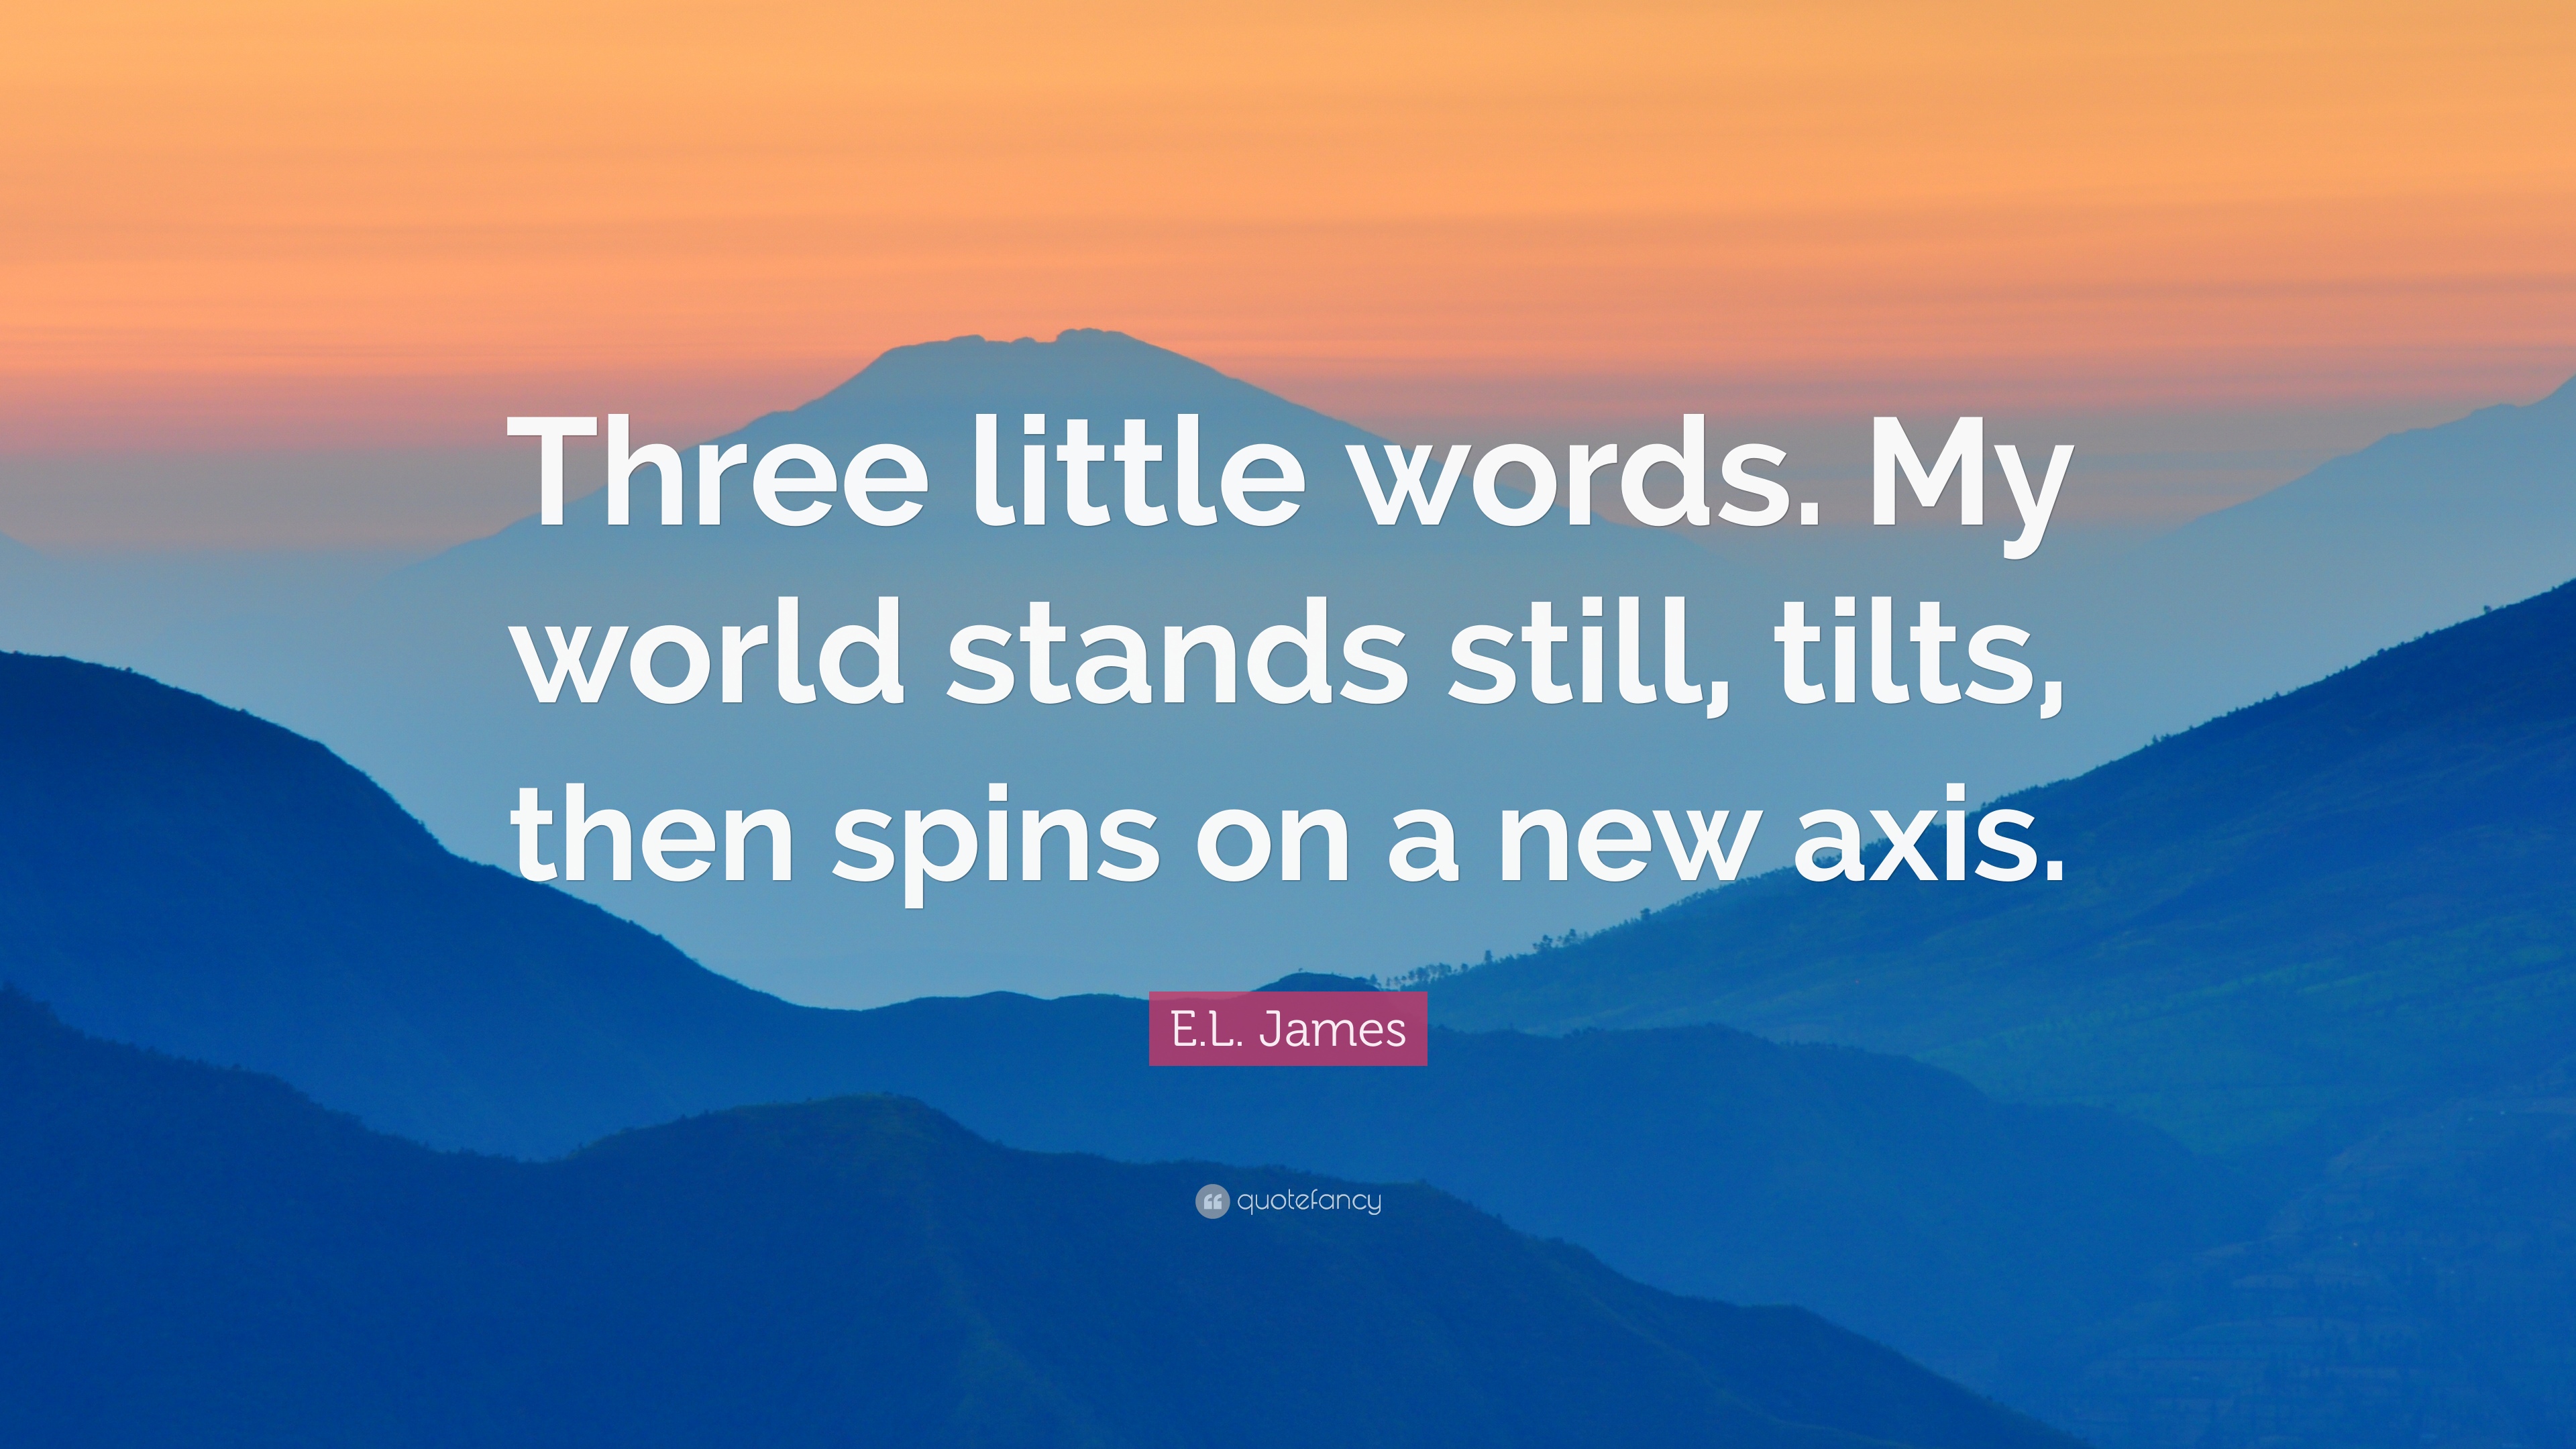 E.L. James Quote: “Three little words. My world stands still, tilts